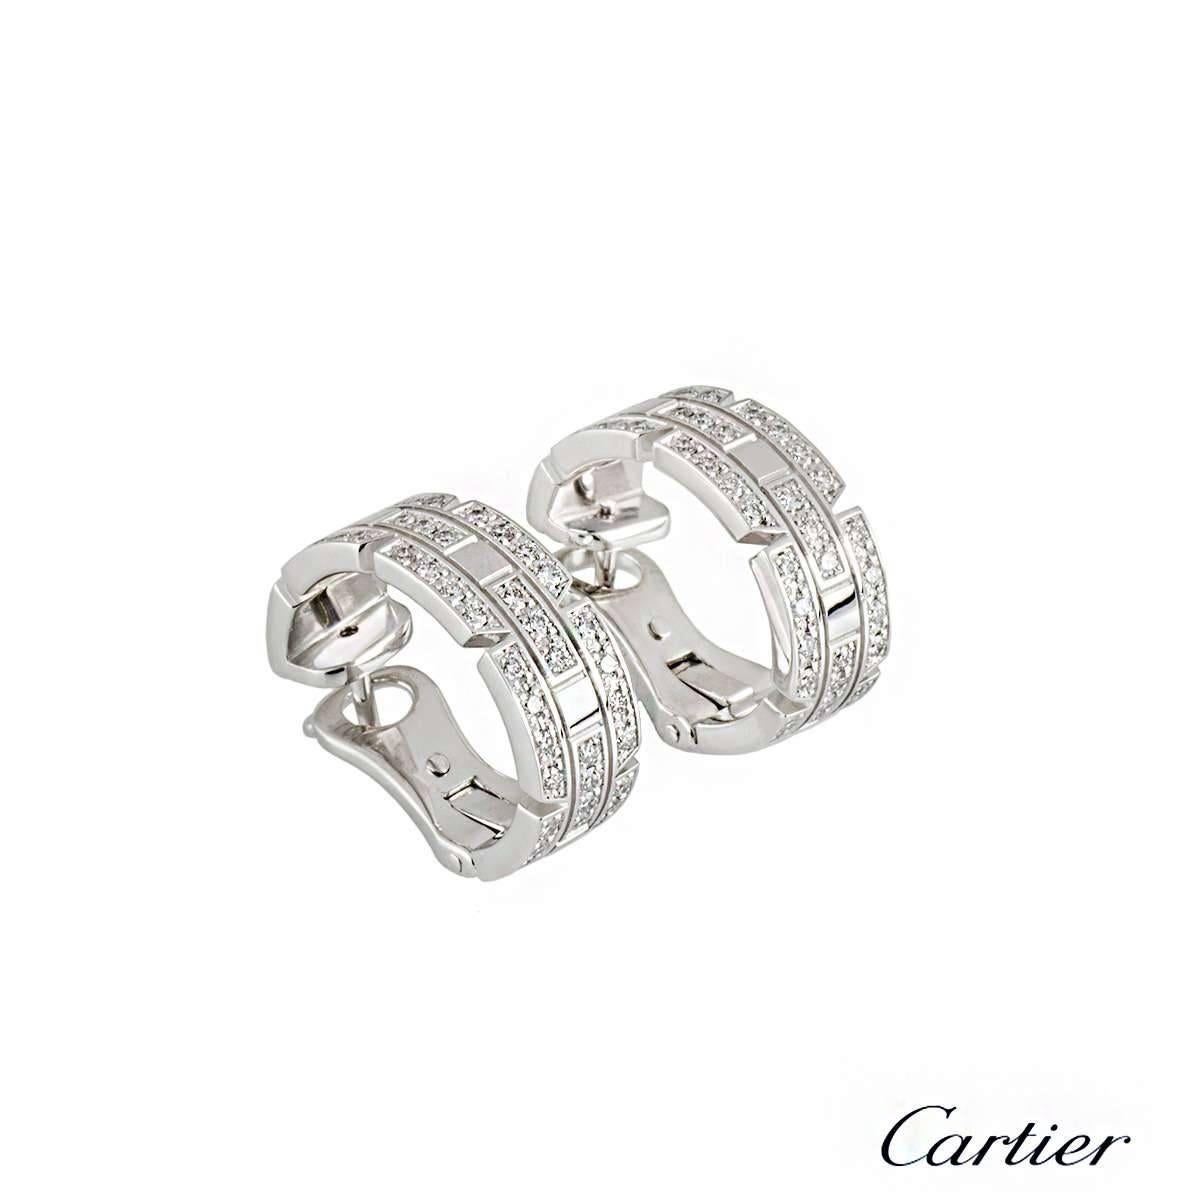 A stunning pair of 18k white gold Cartier Maillon earrings from the Links and Chains collection. Each hoop is made up of iconic 18k white gold solid links with 50 round brilliant cut pave set diamonds, totalling approximately 1.00ct. The earrings